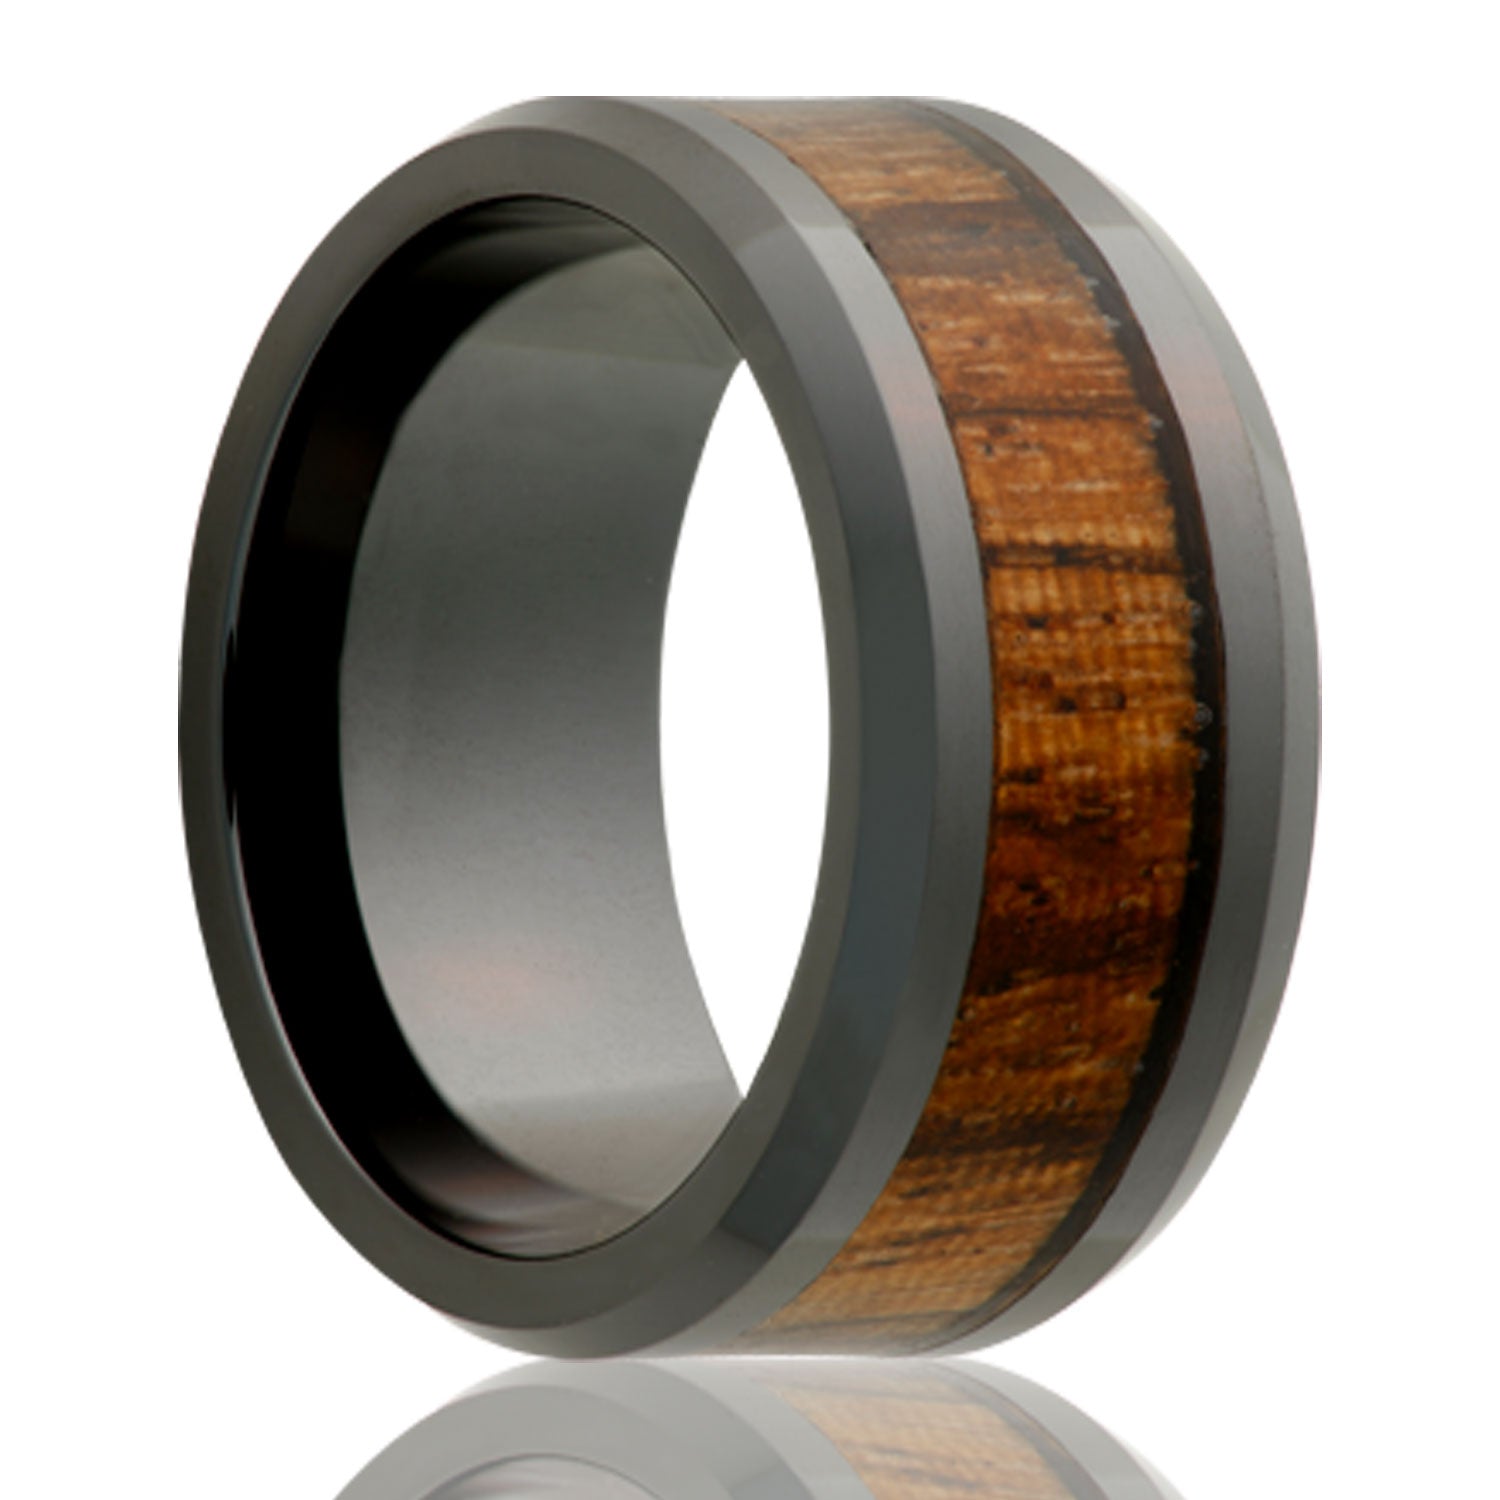 A zebra wood inlay ceramic wedding band with beveled edges displayed on a neutral white background.